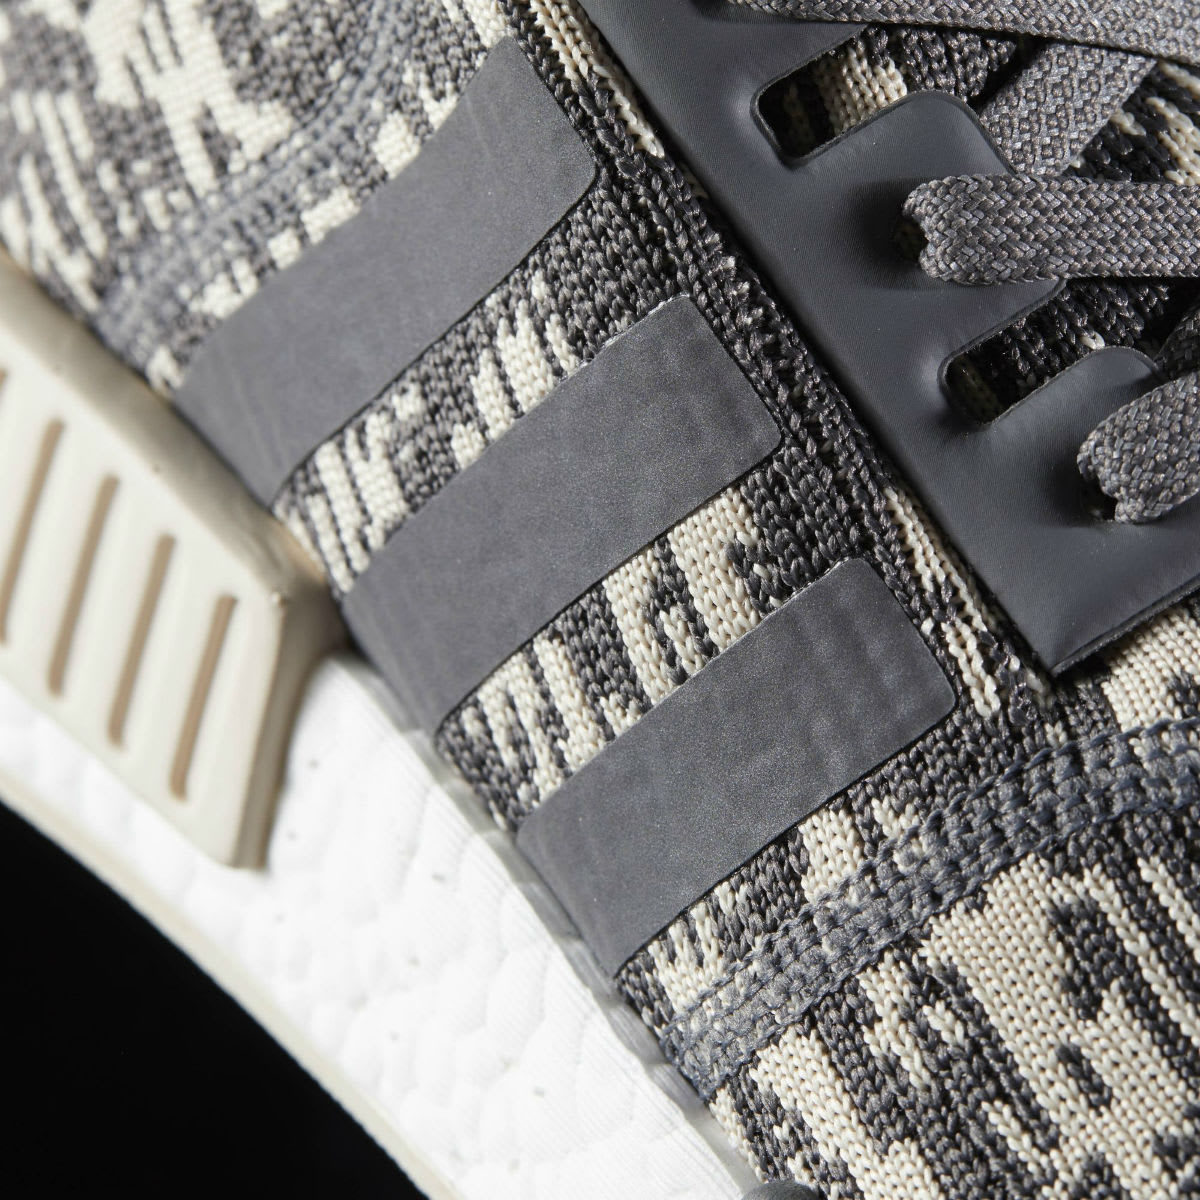 Adidas NMD Grey Linen Camo Release Date Stripes